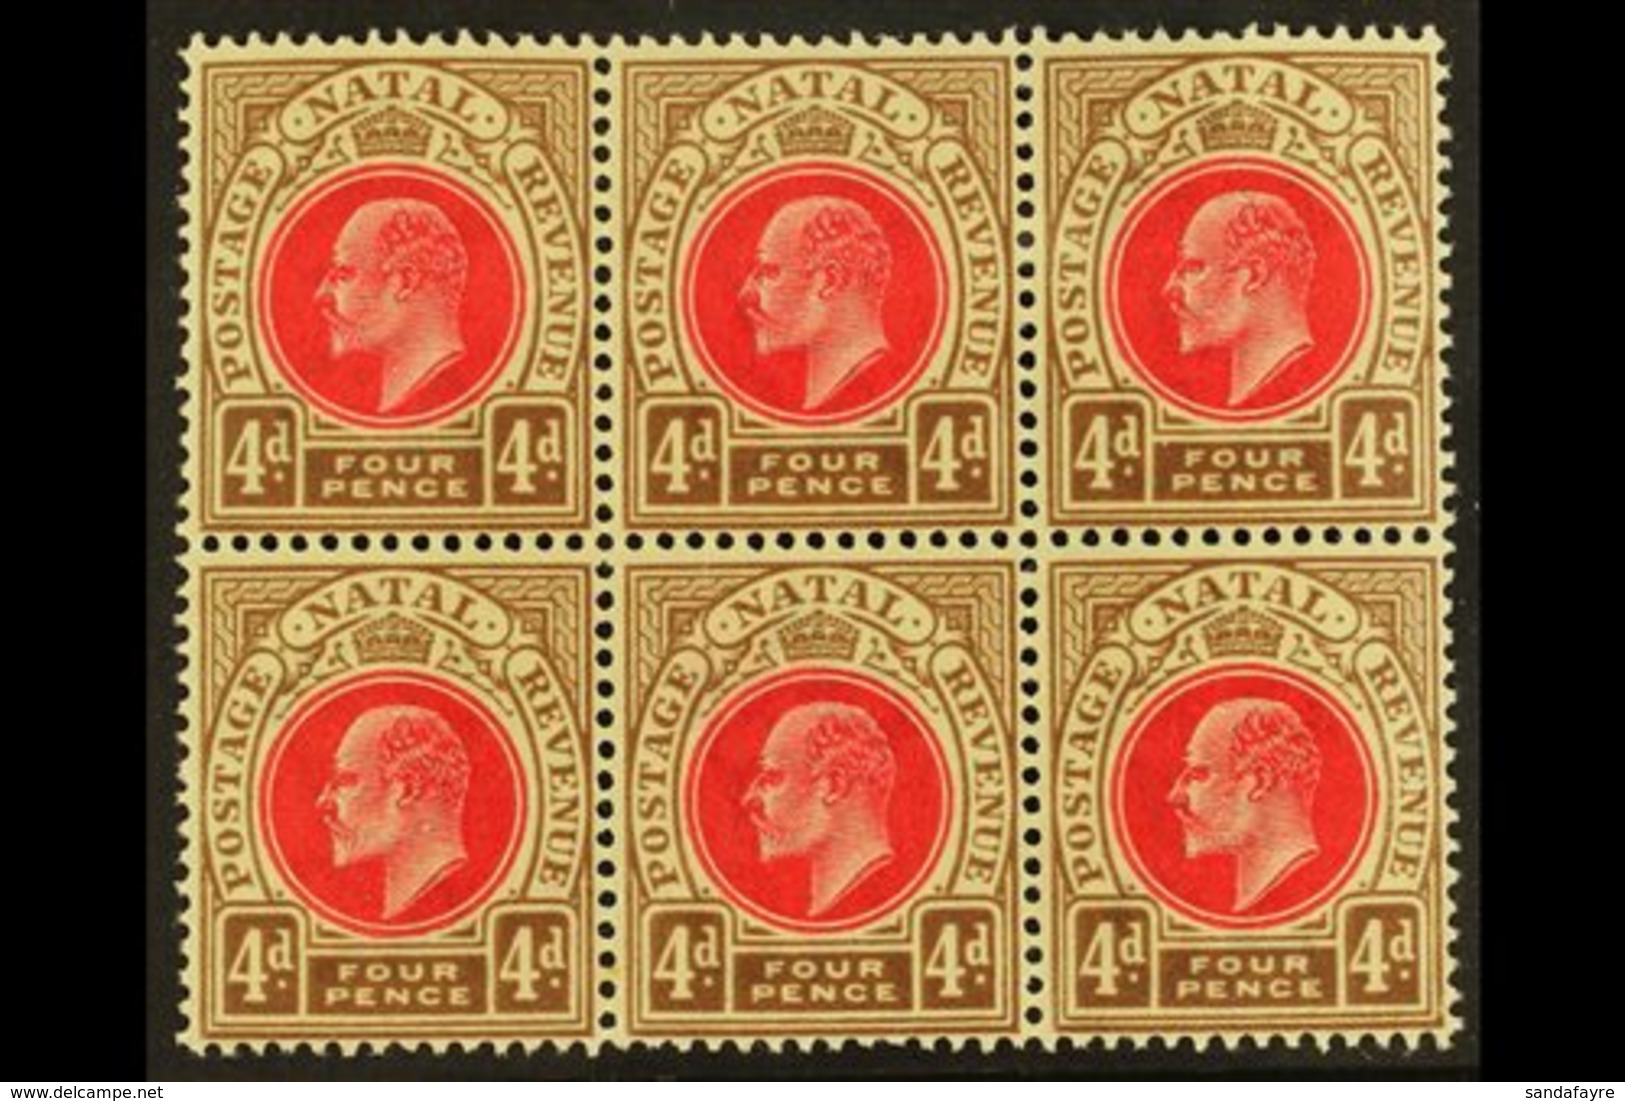 \Y NATAL\Y 1902-3 4d Carmine & Cinnamon, Wmk Crown CA , BLOCK OF SIX, SG 133, Very Slightly Toned Gum, Otherwise Never H - Unclassified